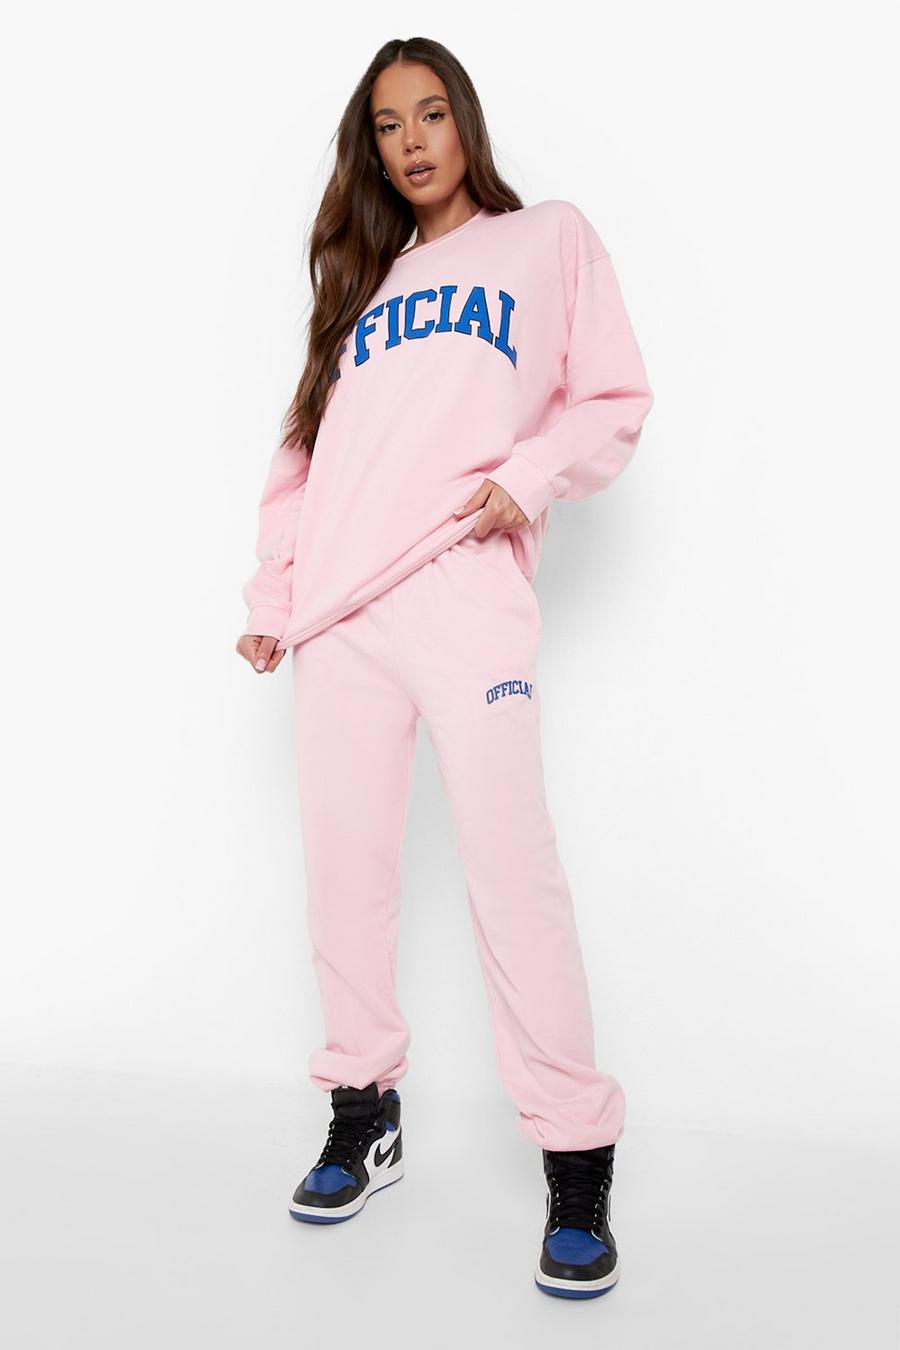 Chándal Official con sudadera, Light pink image number 1